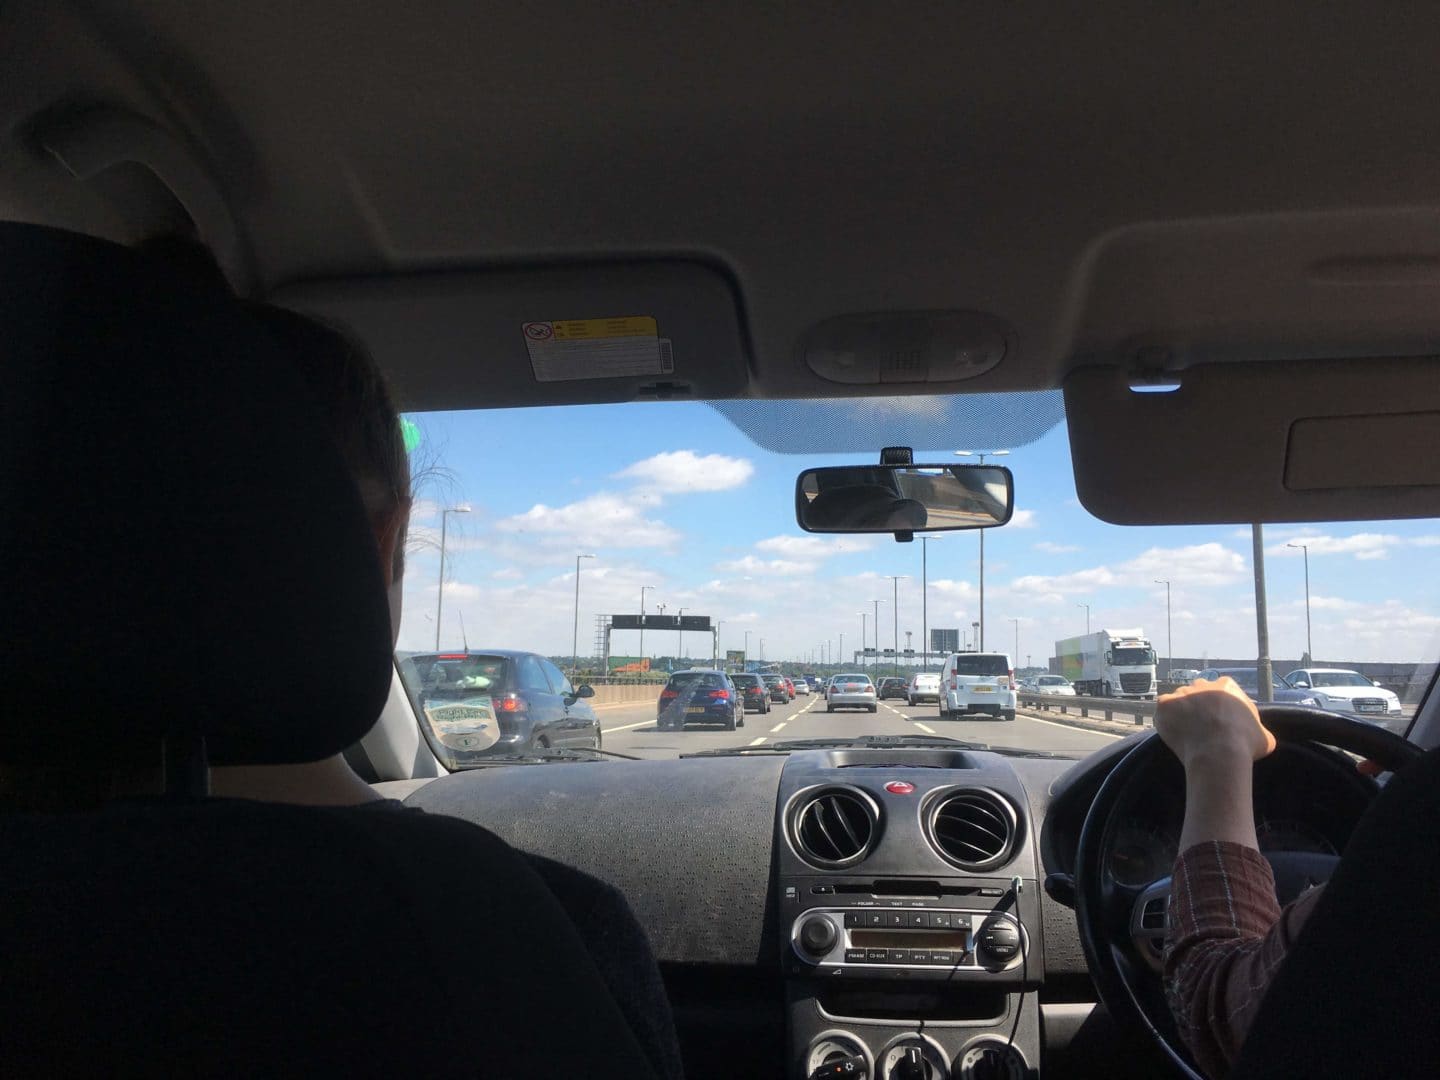 A car passenger's view of heavy traffic on a dual carriageway